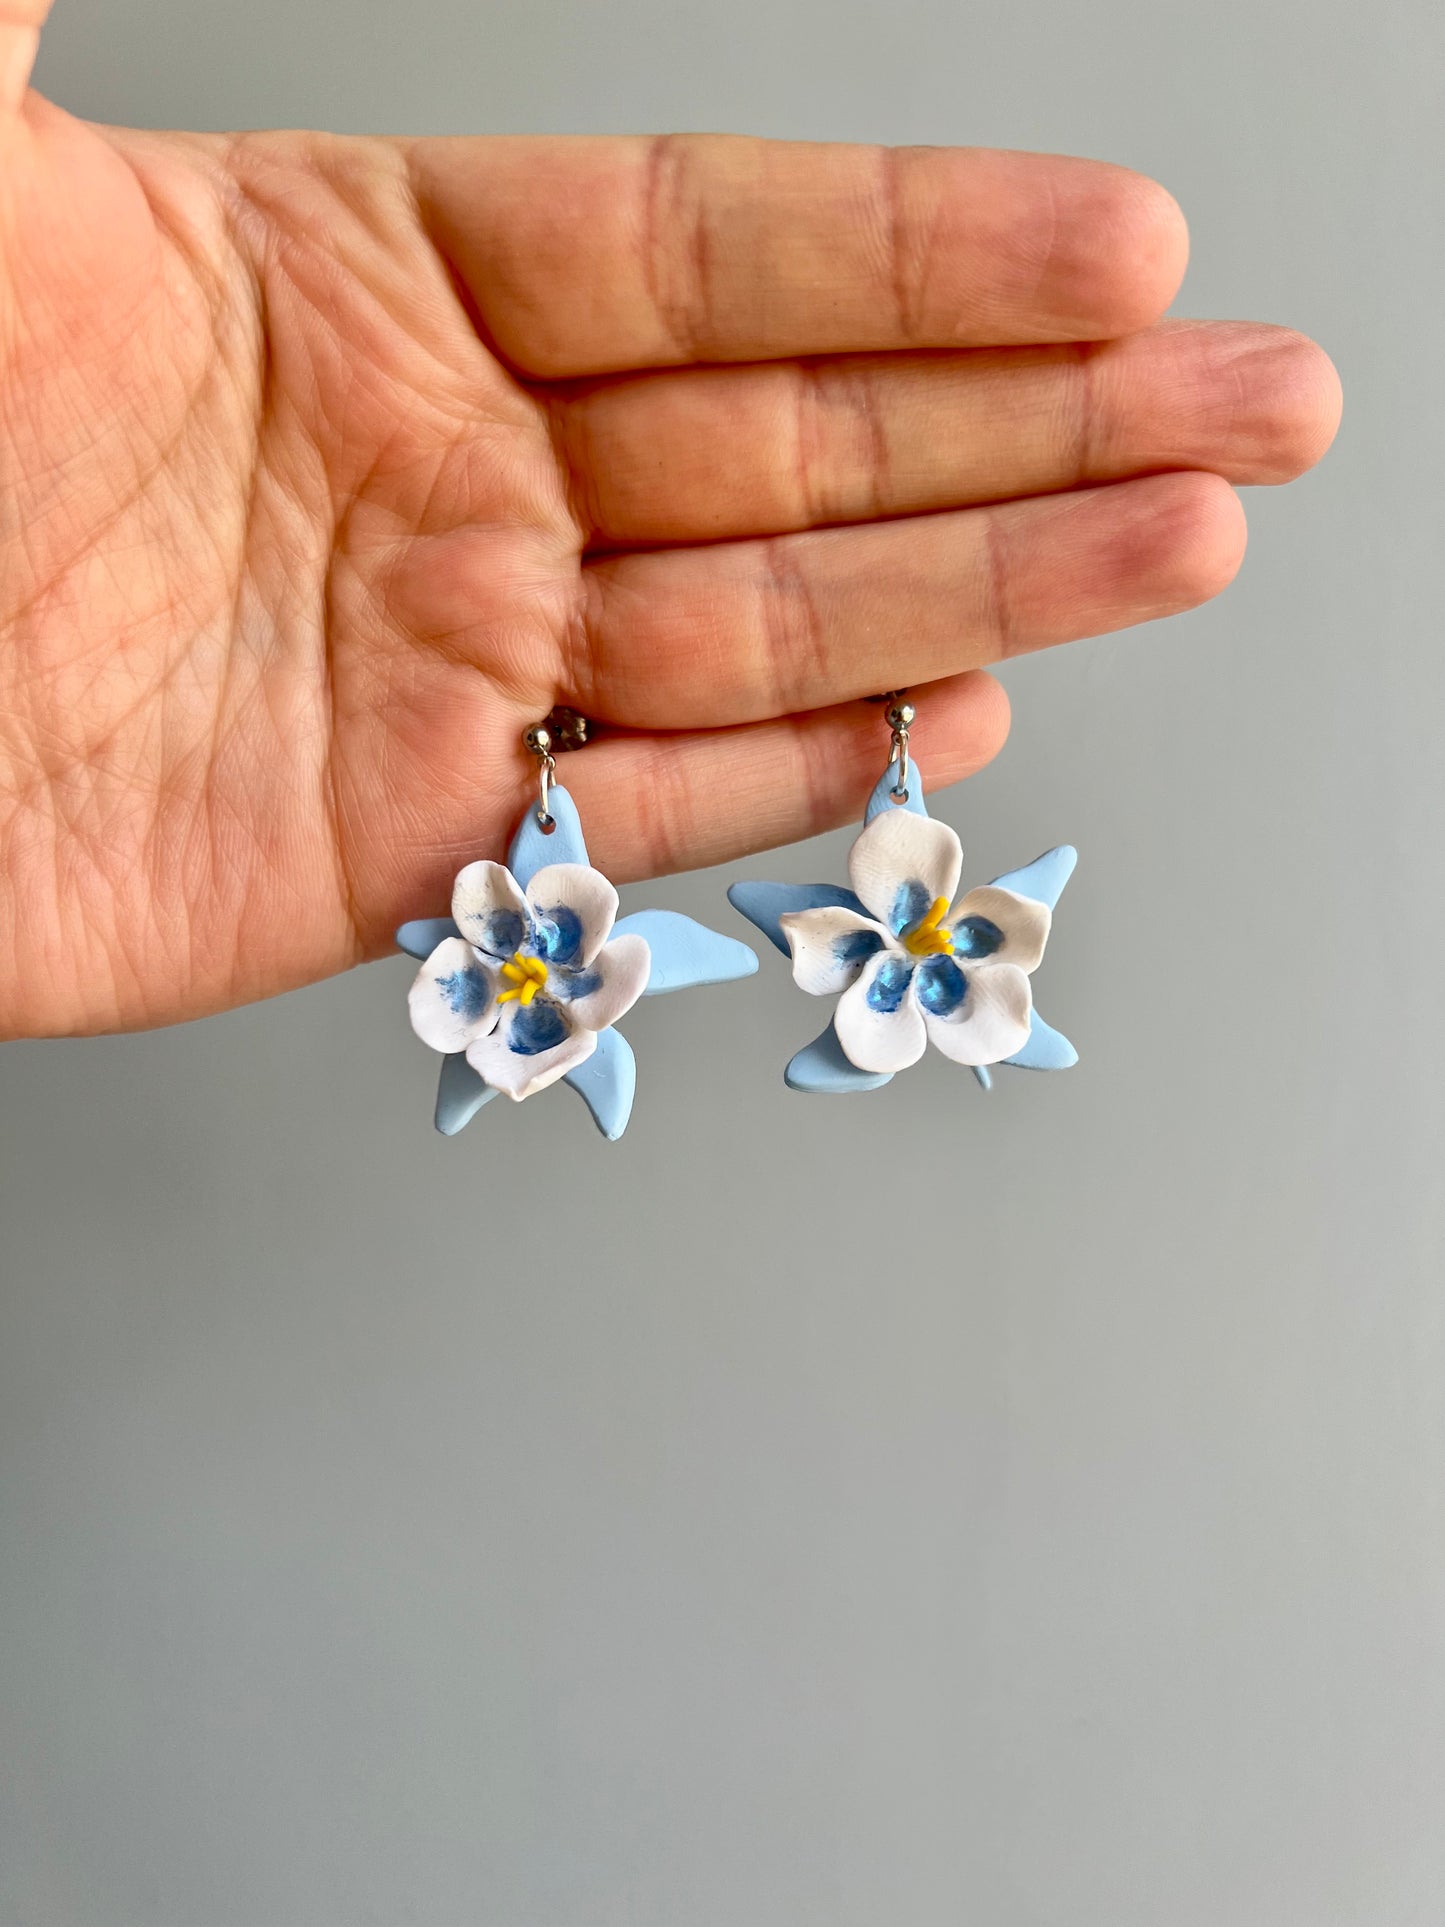 Celebrate Colorado's state flower with our columbine earrings, a symbol of beauty and resilience. These earrings capture the essence of the Rockies, perfect for nature enthusiasts.